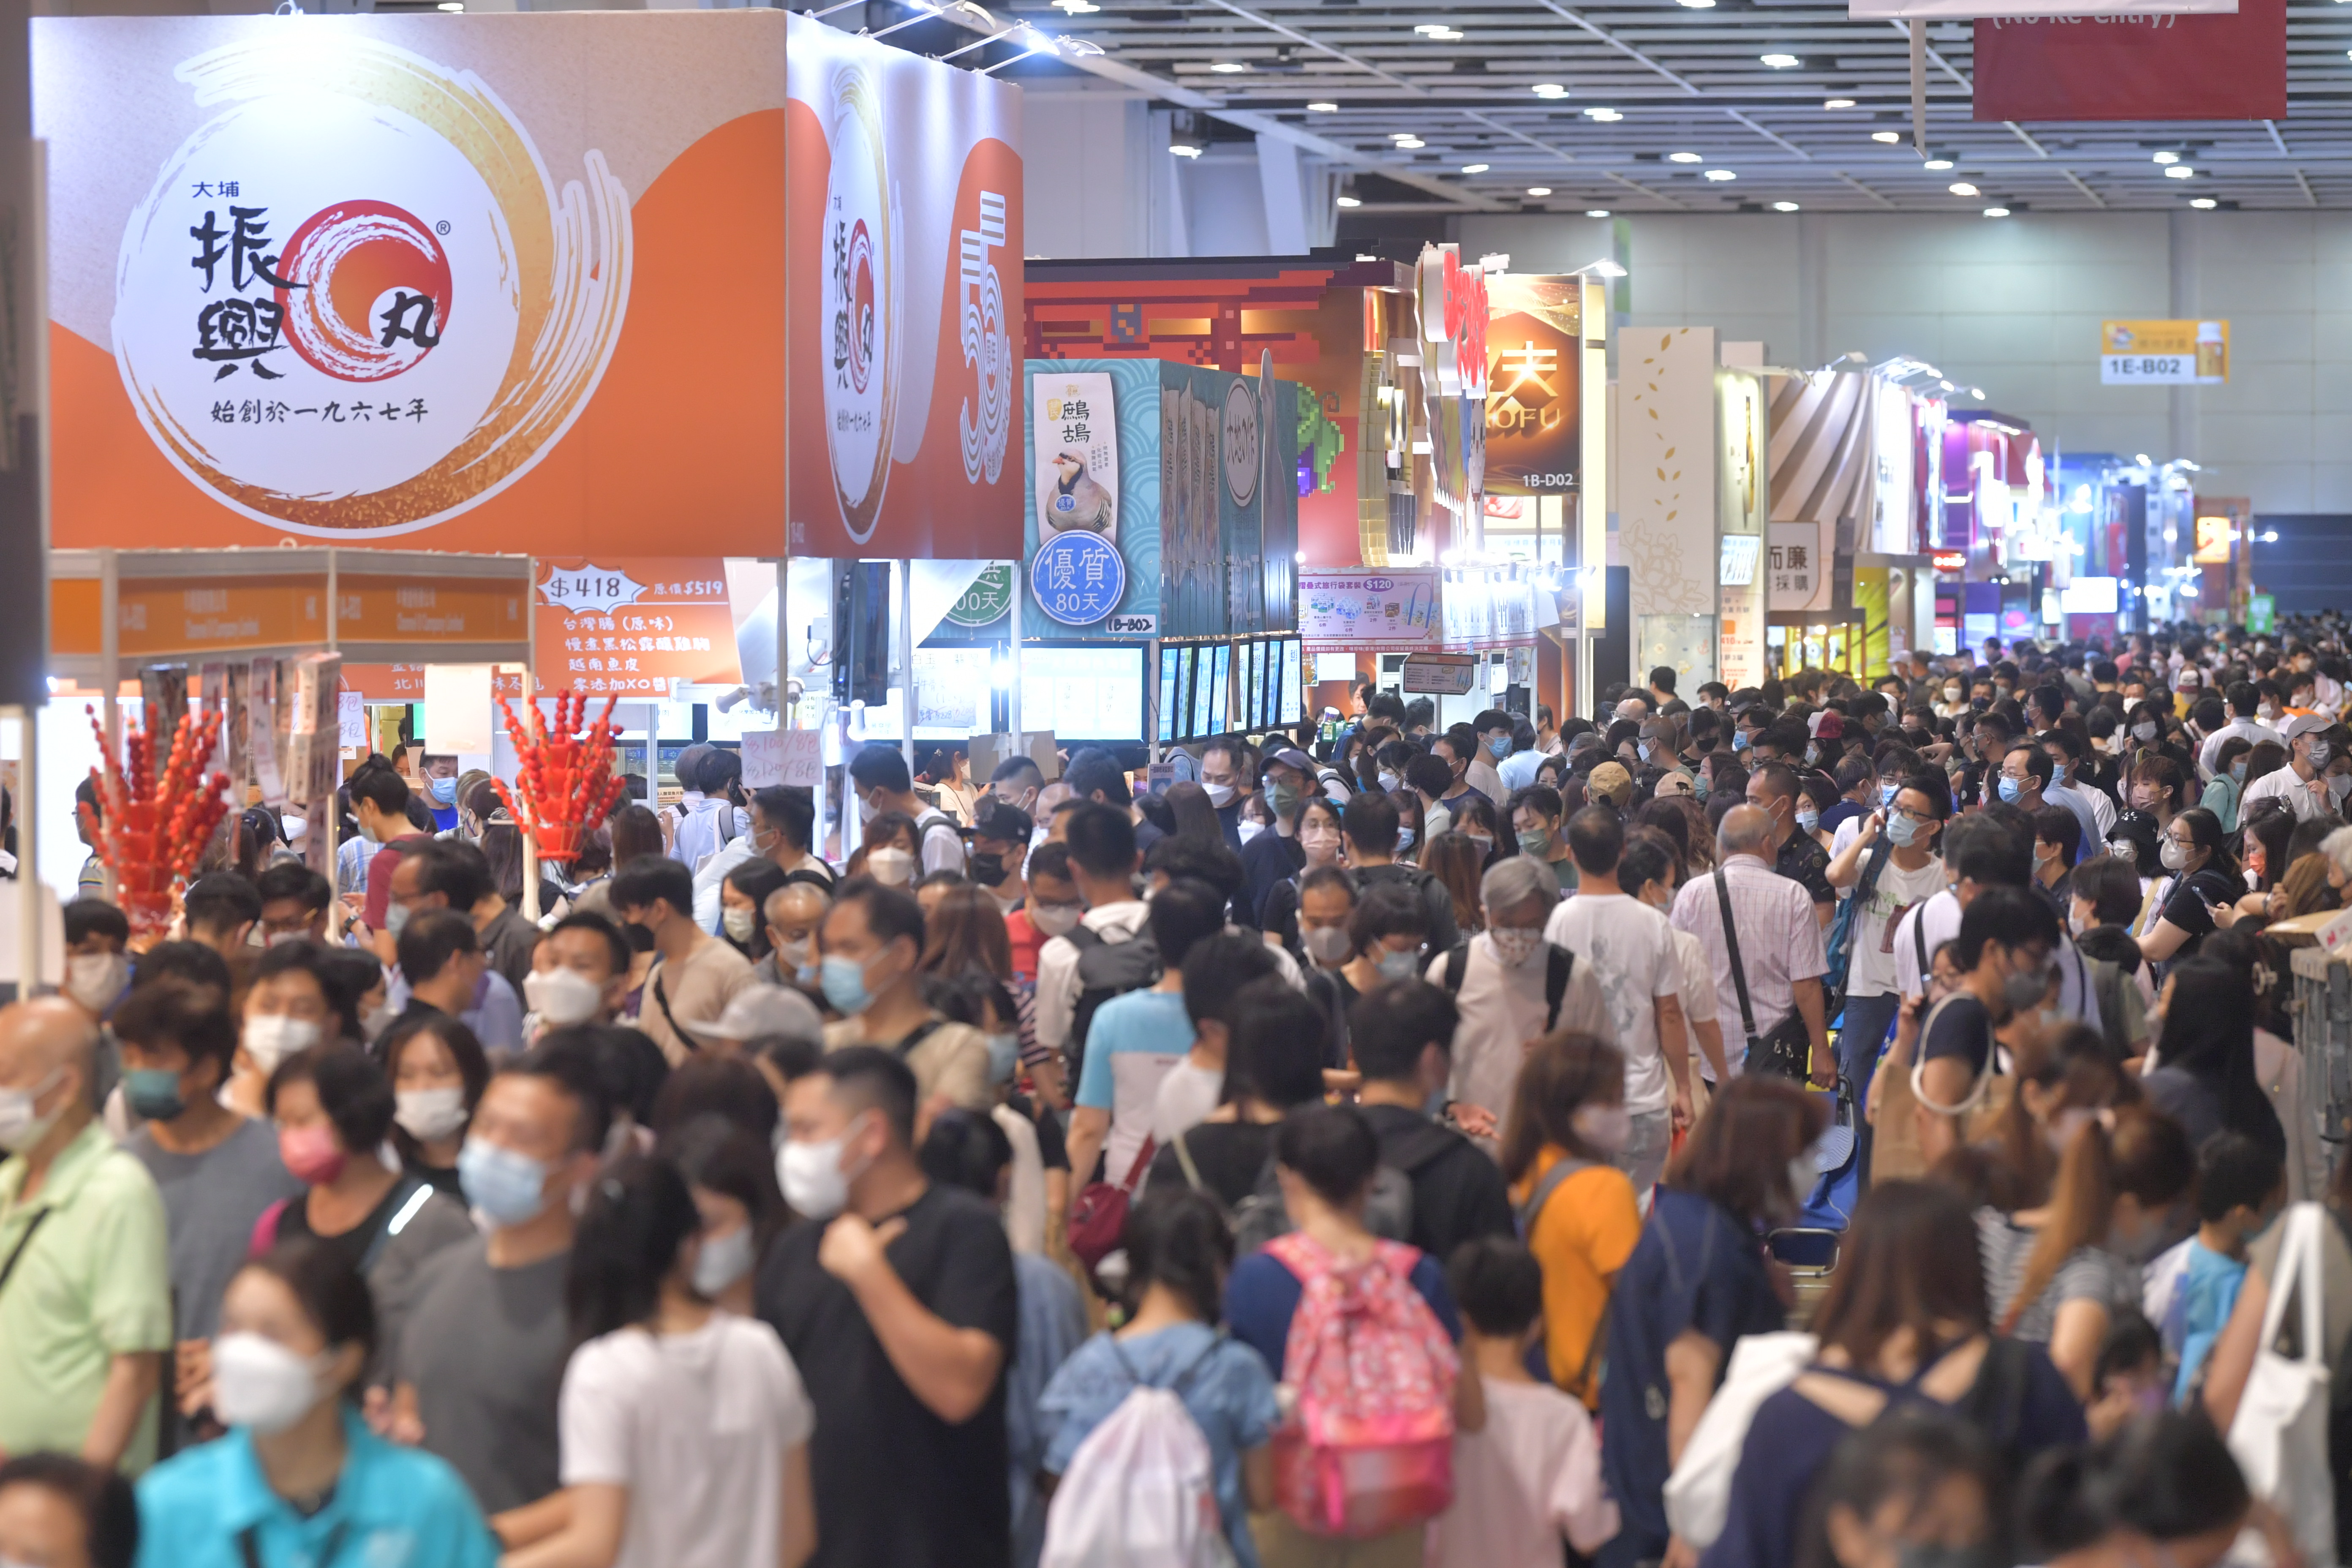 The Food Expo, Home Delights Expo, Beauty & Wellness Expo and Hong Kong International Tea Fair drew to a close today, attracting more than 430,000 visitors